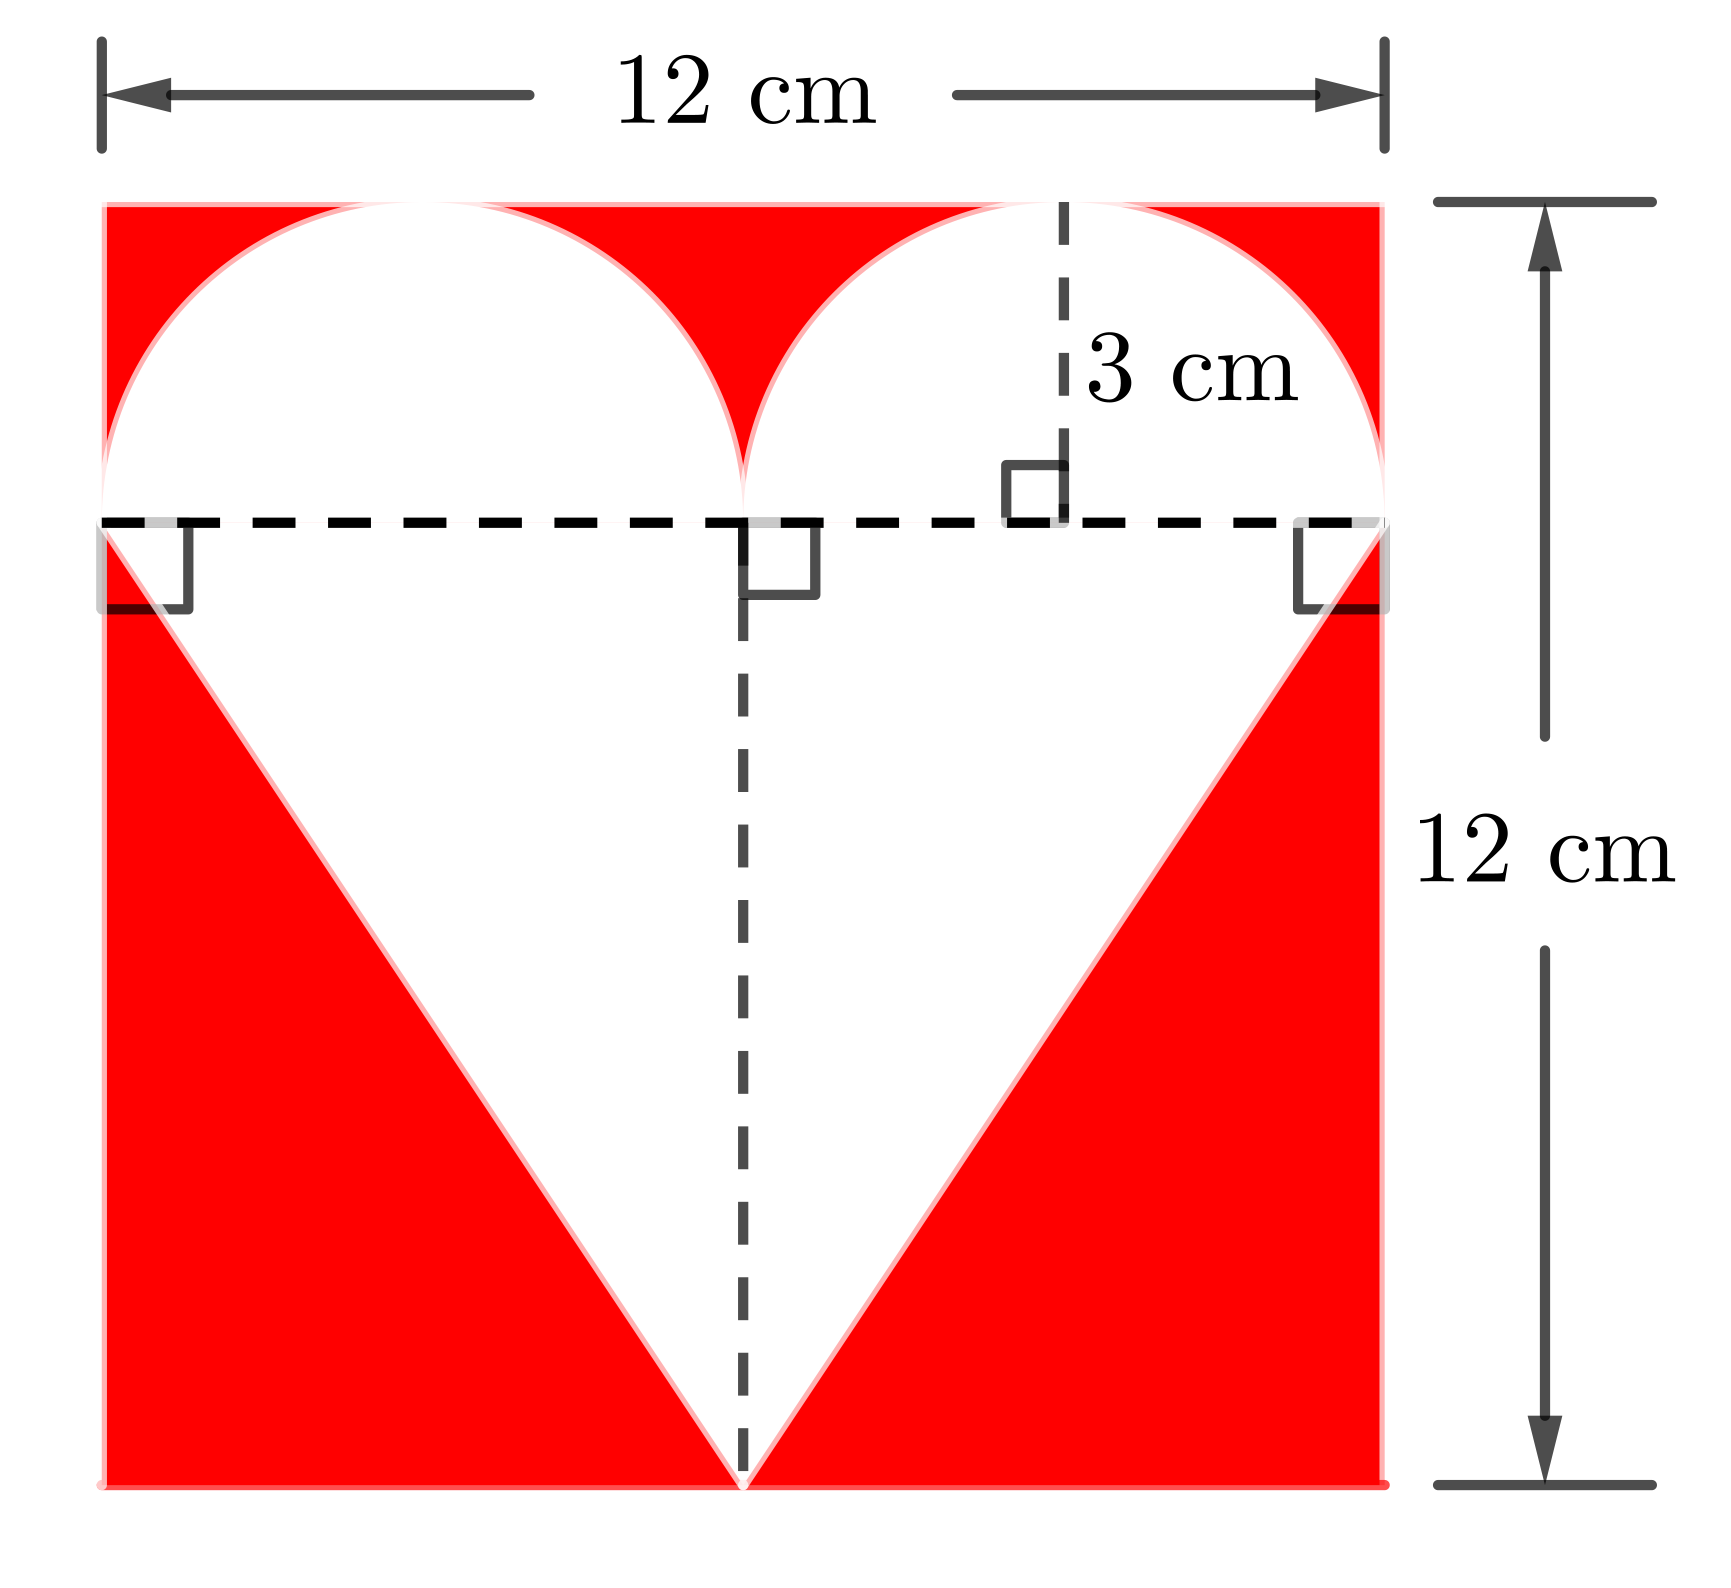 The red square with a white heart-shaped region and a dashed horizontal line. A vertical line measuring 3 cm is drawn from the top edge of the square to the dashed line. Another vertical line is drawn from the dashed line to the bottom vertex of the triangle.